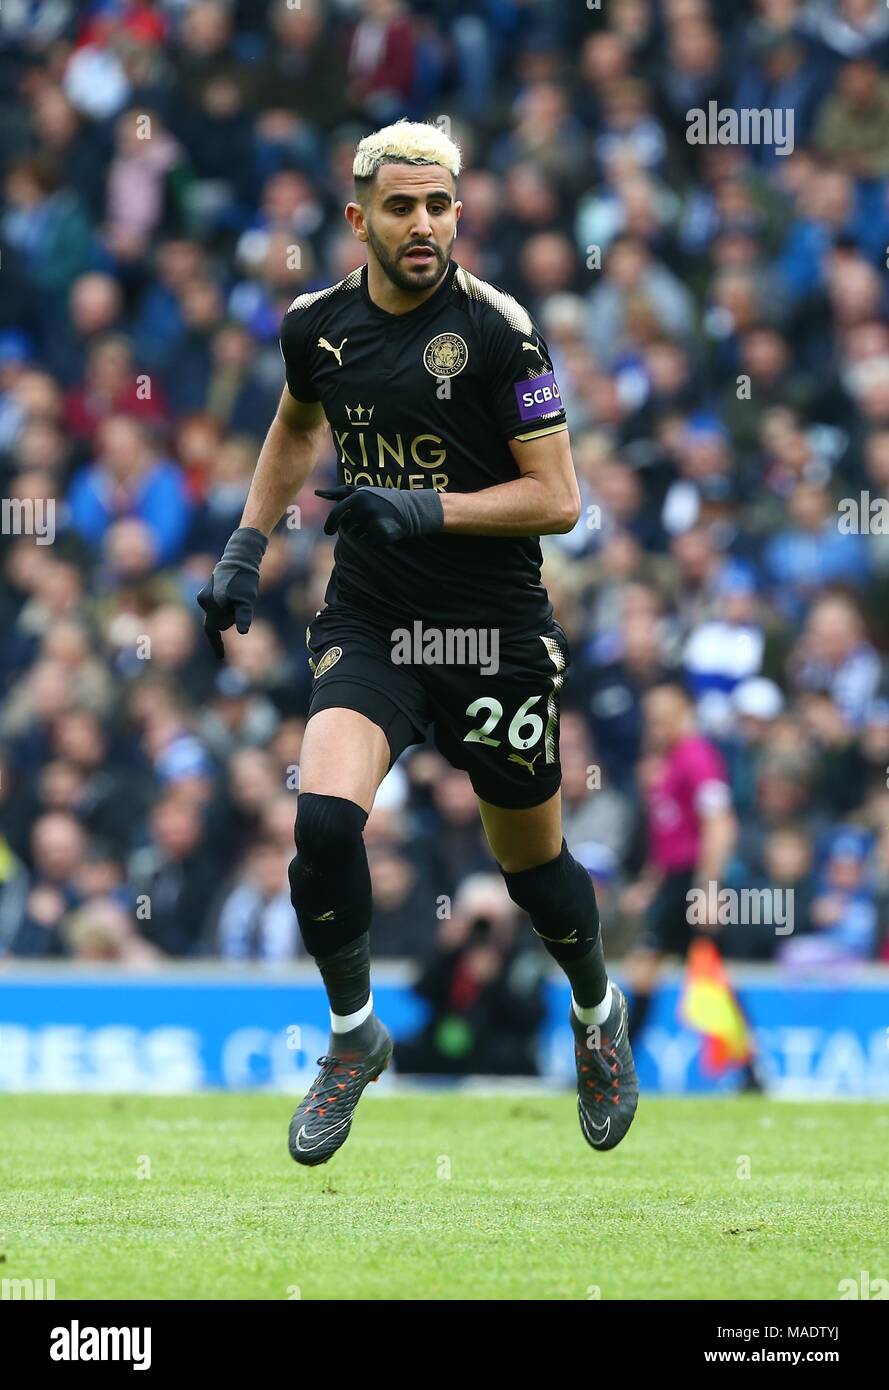 Riyad Mahrez of Leicester during the Premier League match between Brighton and Hove Albion and Leicester City at the American Express Community Stadium in Brighton and Hove. 31 Mar 2018 *** Editorial use only. No merchandising. For Football images FA and Premier League restrictions apply inc. no internet/mobile usage without FAPL license - for details contact Football Dataco *** Stock Photo